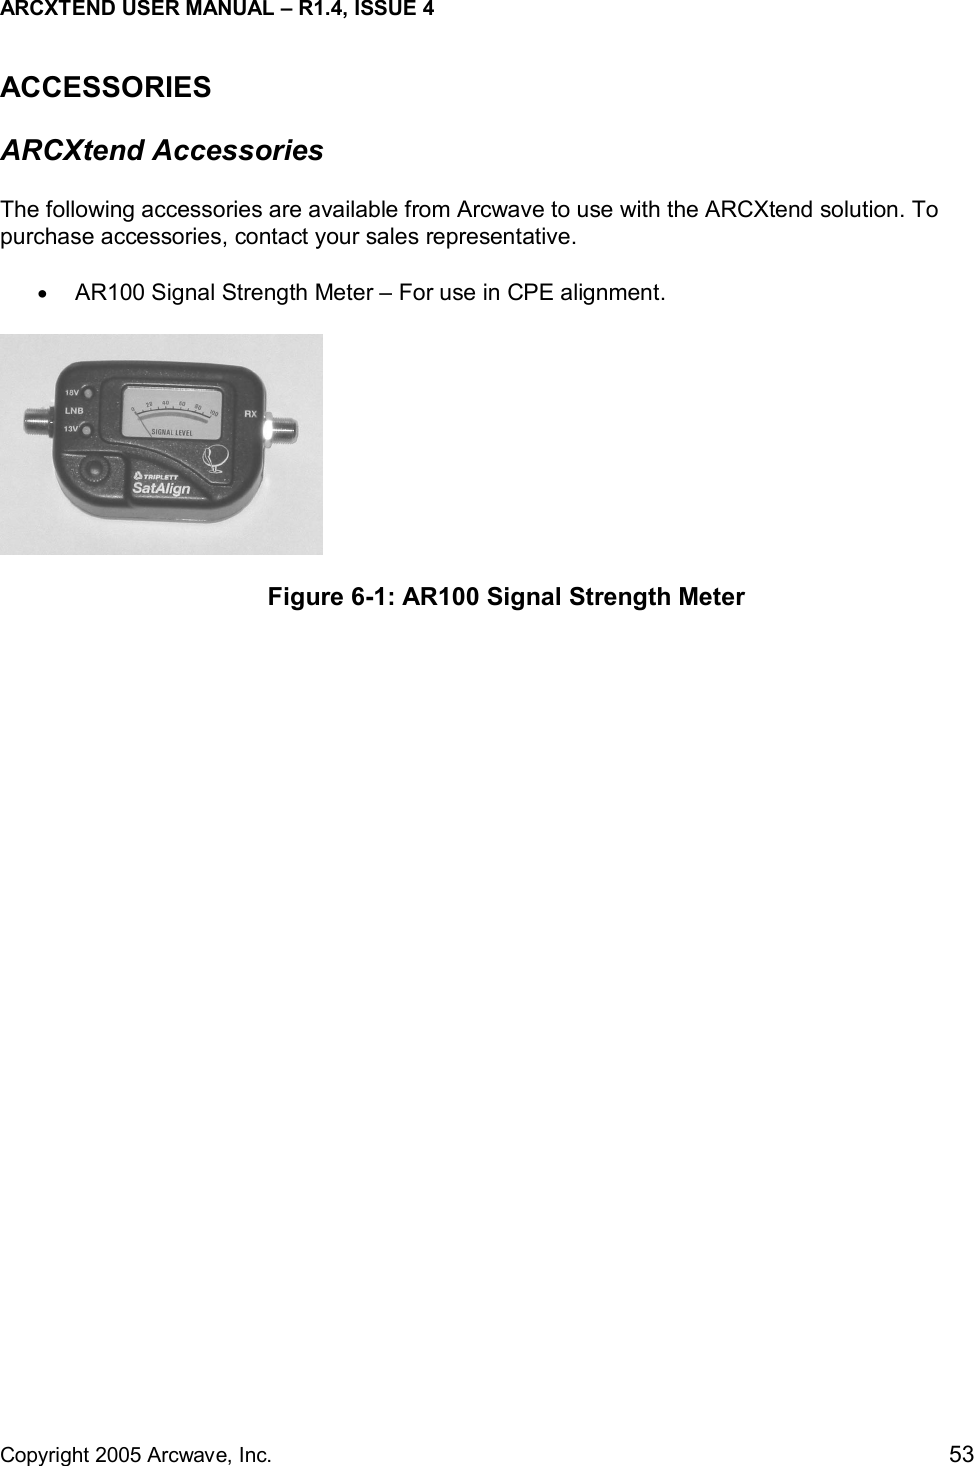 ARCXTEND USER MANUAL – R1.4, ISSUE 4  Copyright 2005 Arcwave, Inc.    53 ACCESSORIES ARCXtend Accessories The following accessories are available from Arcwave to use with the ARCXtend solution. To purchase accessories, contact your sales representative. •  AR100 Signal Strength Meter – For use in CPE alignment.   Figure 6-1: AR100 Signal Strength Meter 